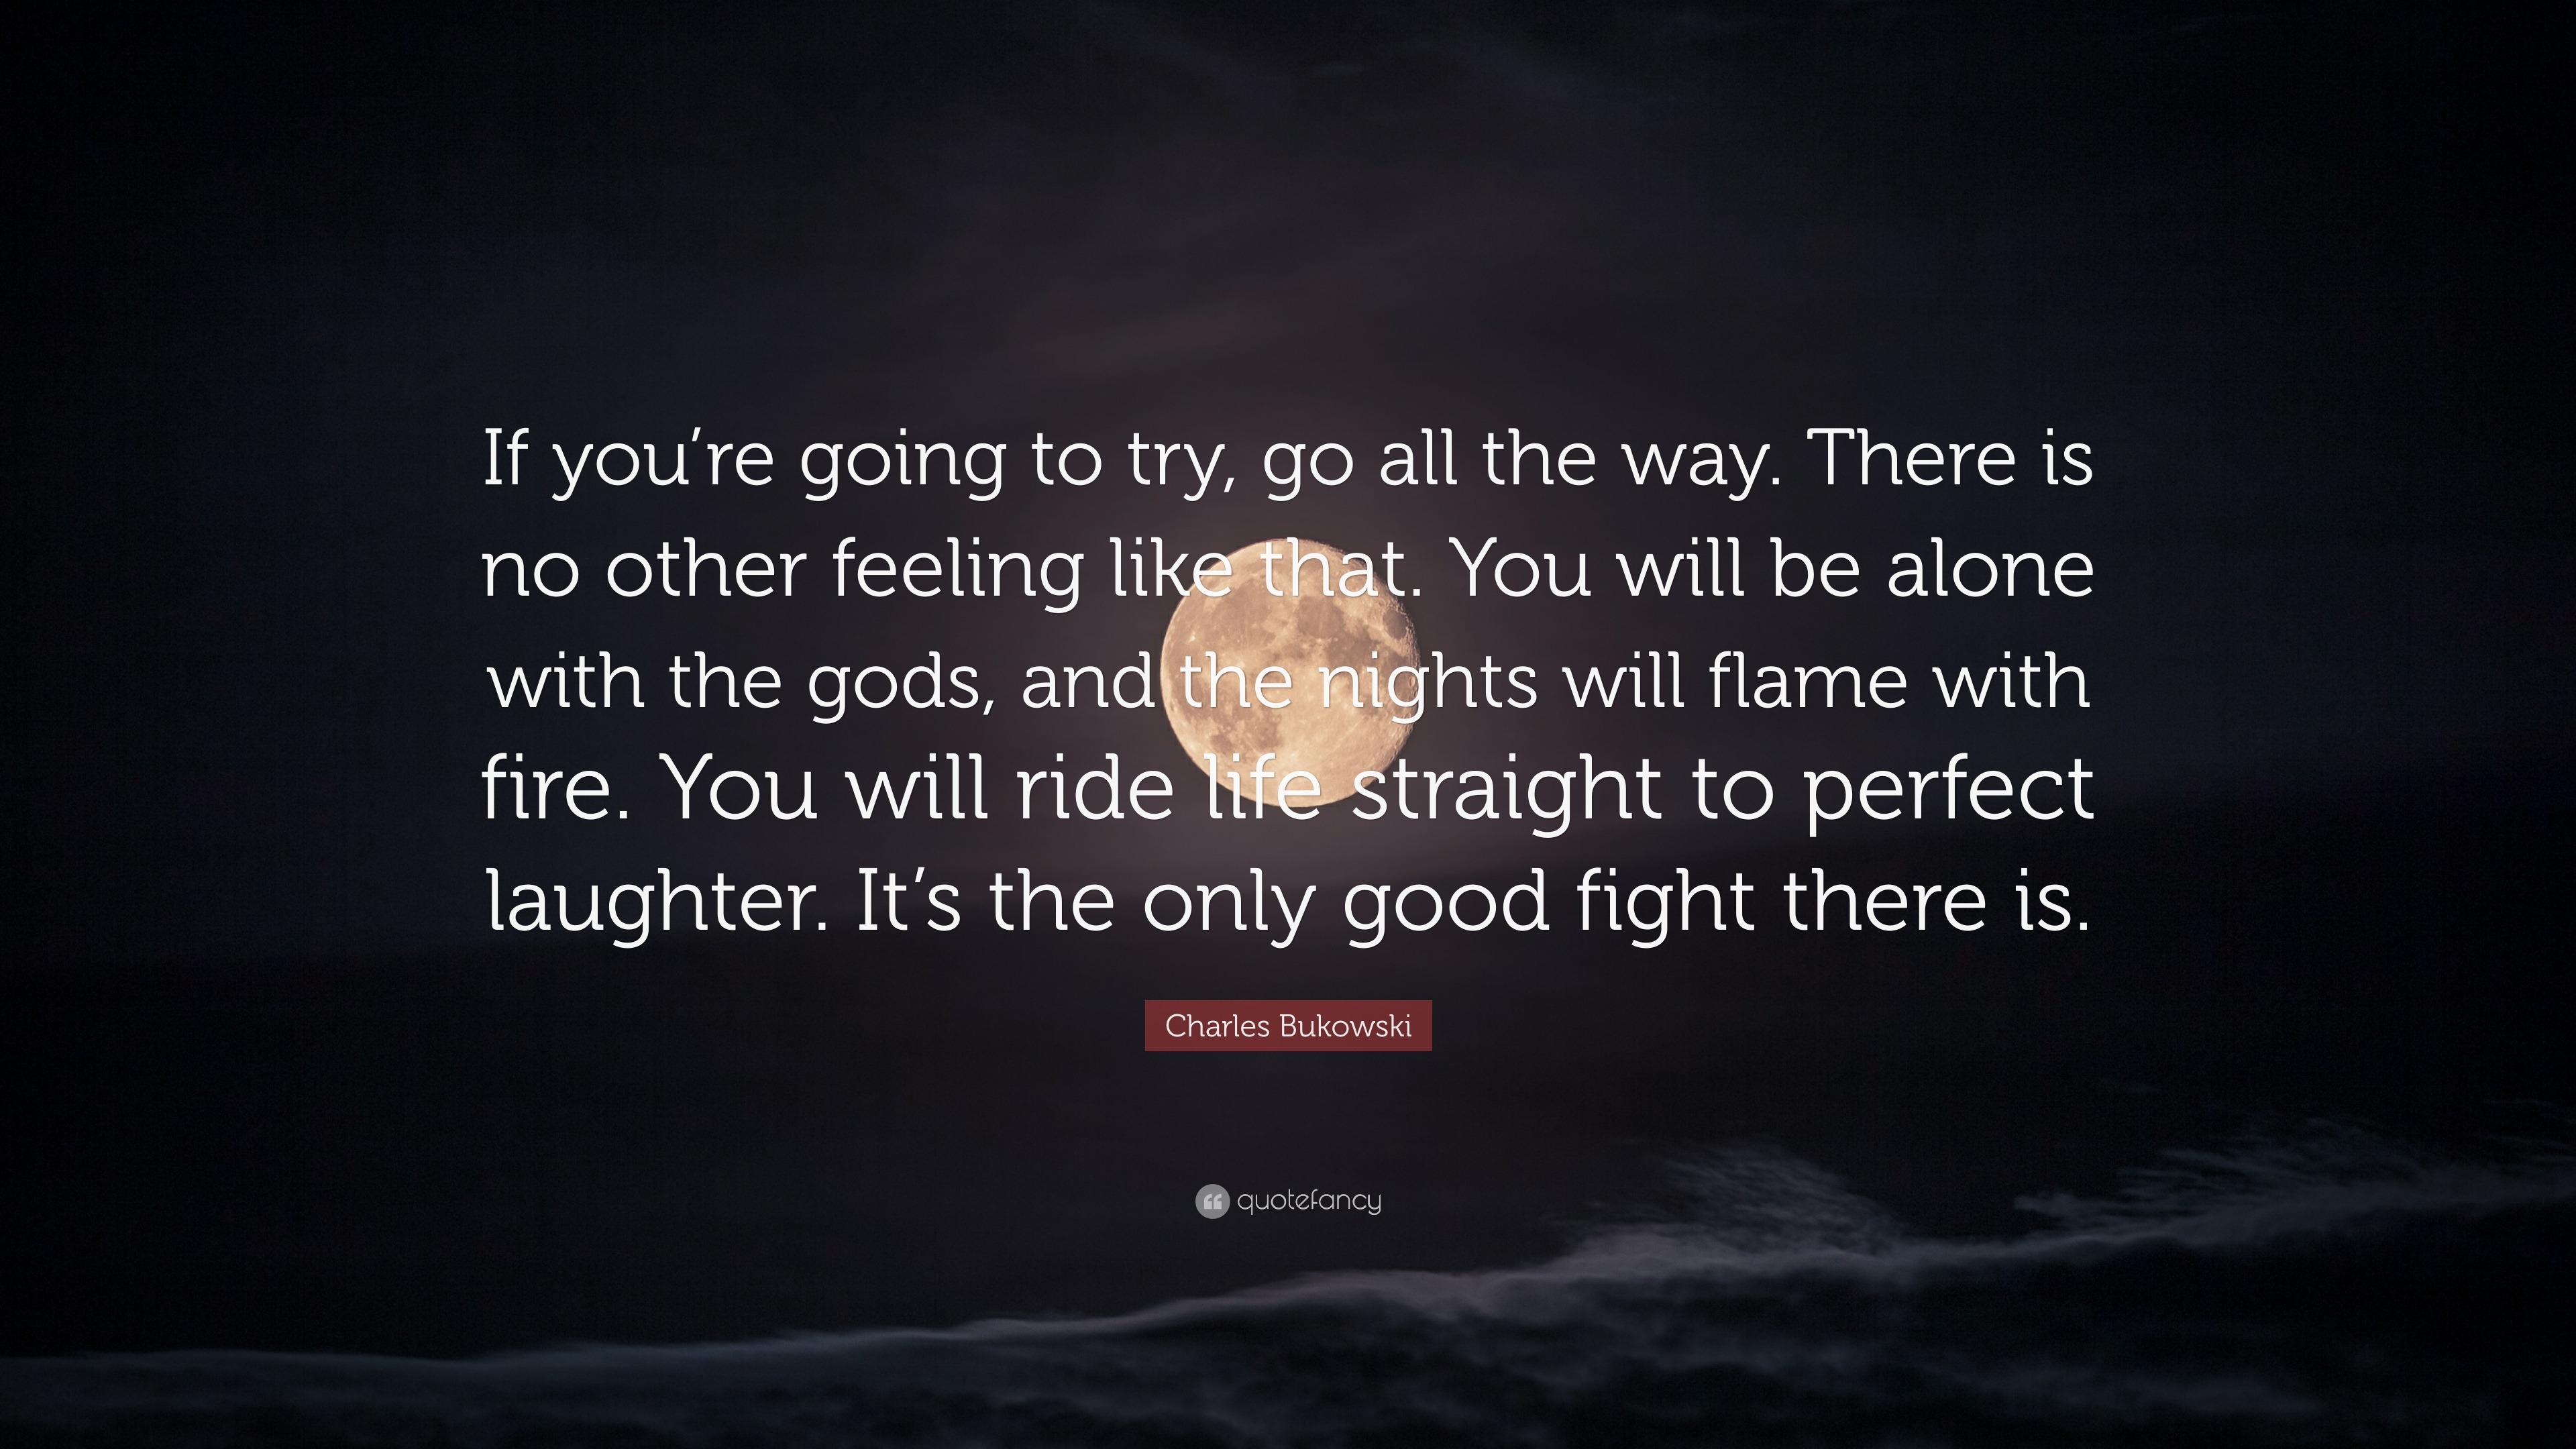 Charles Bukowski Quote: “If you're going to try, go all the way. There is  no other feeling like that. You will be alone with the gods, and the ni...”